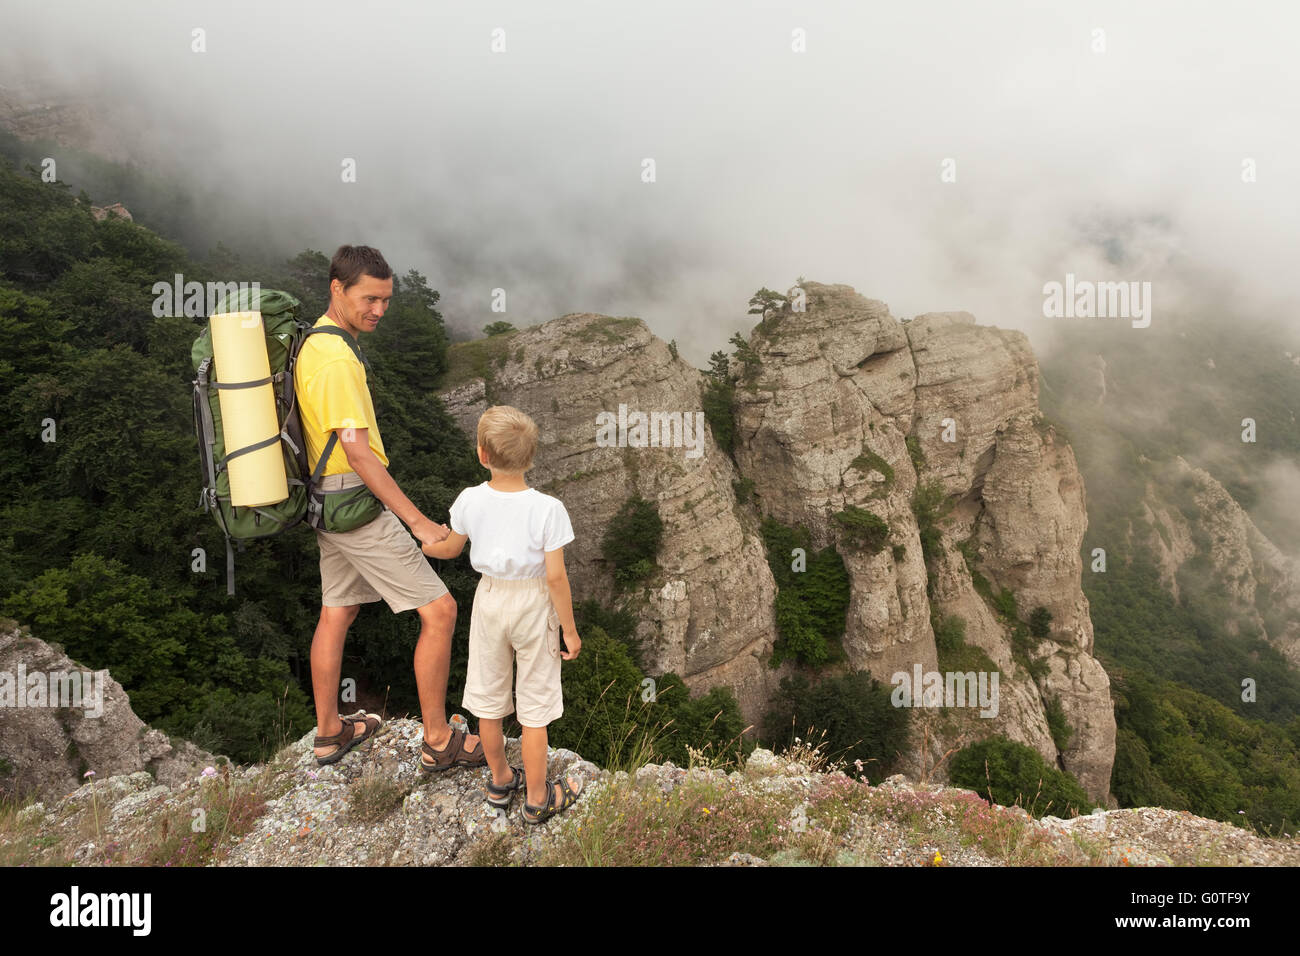 Backpacker with little son in the foggy mountains. Stock Photo